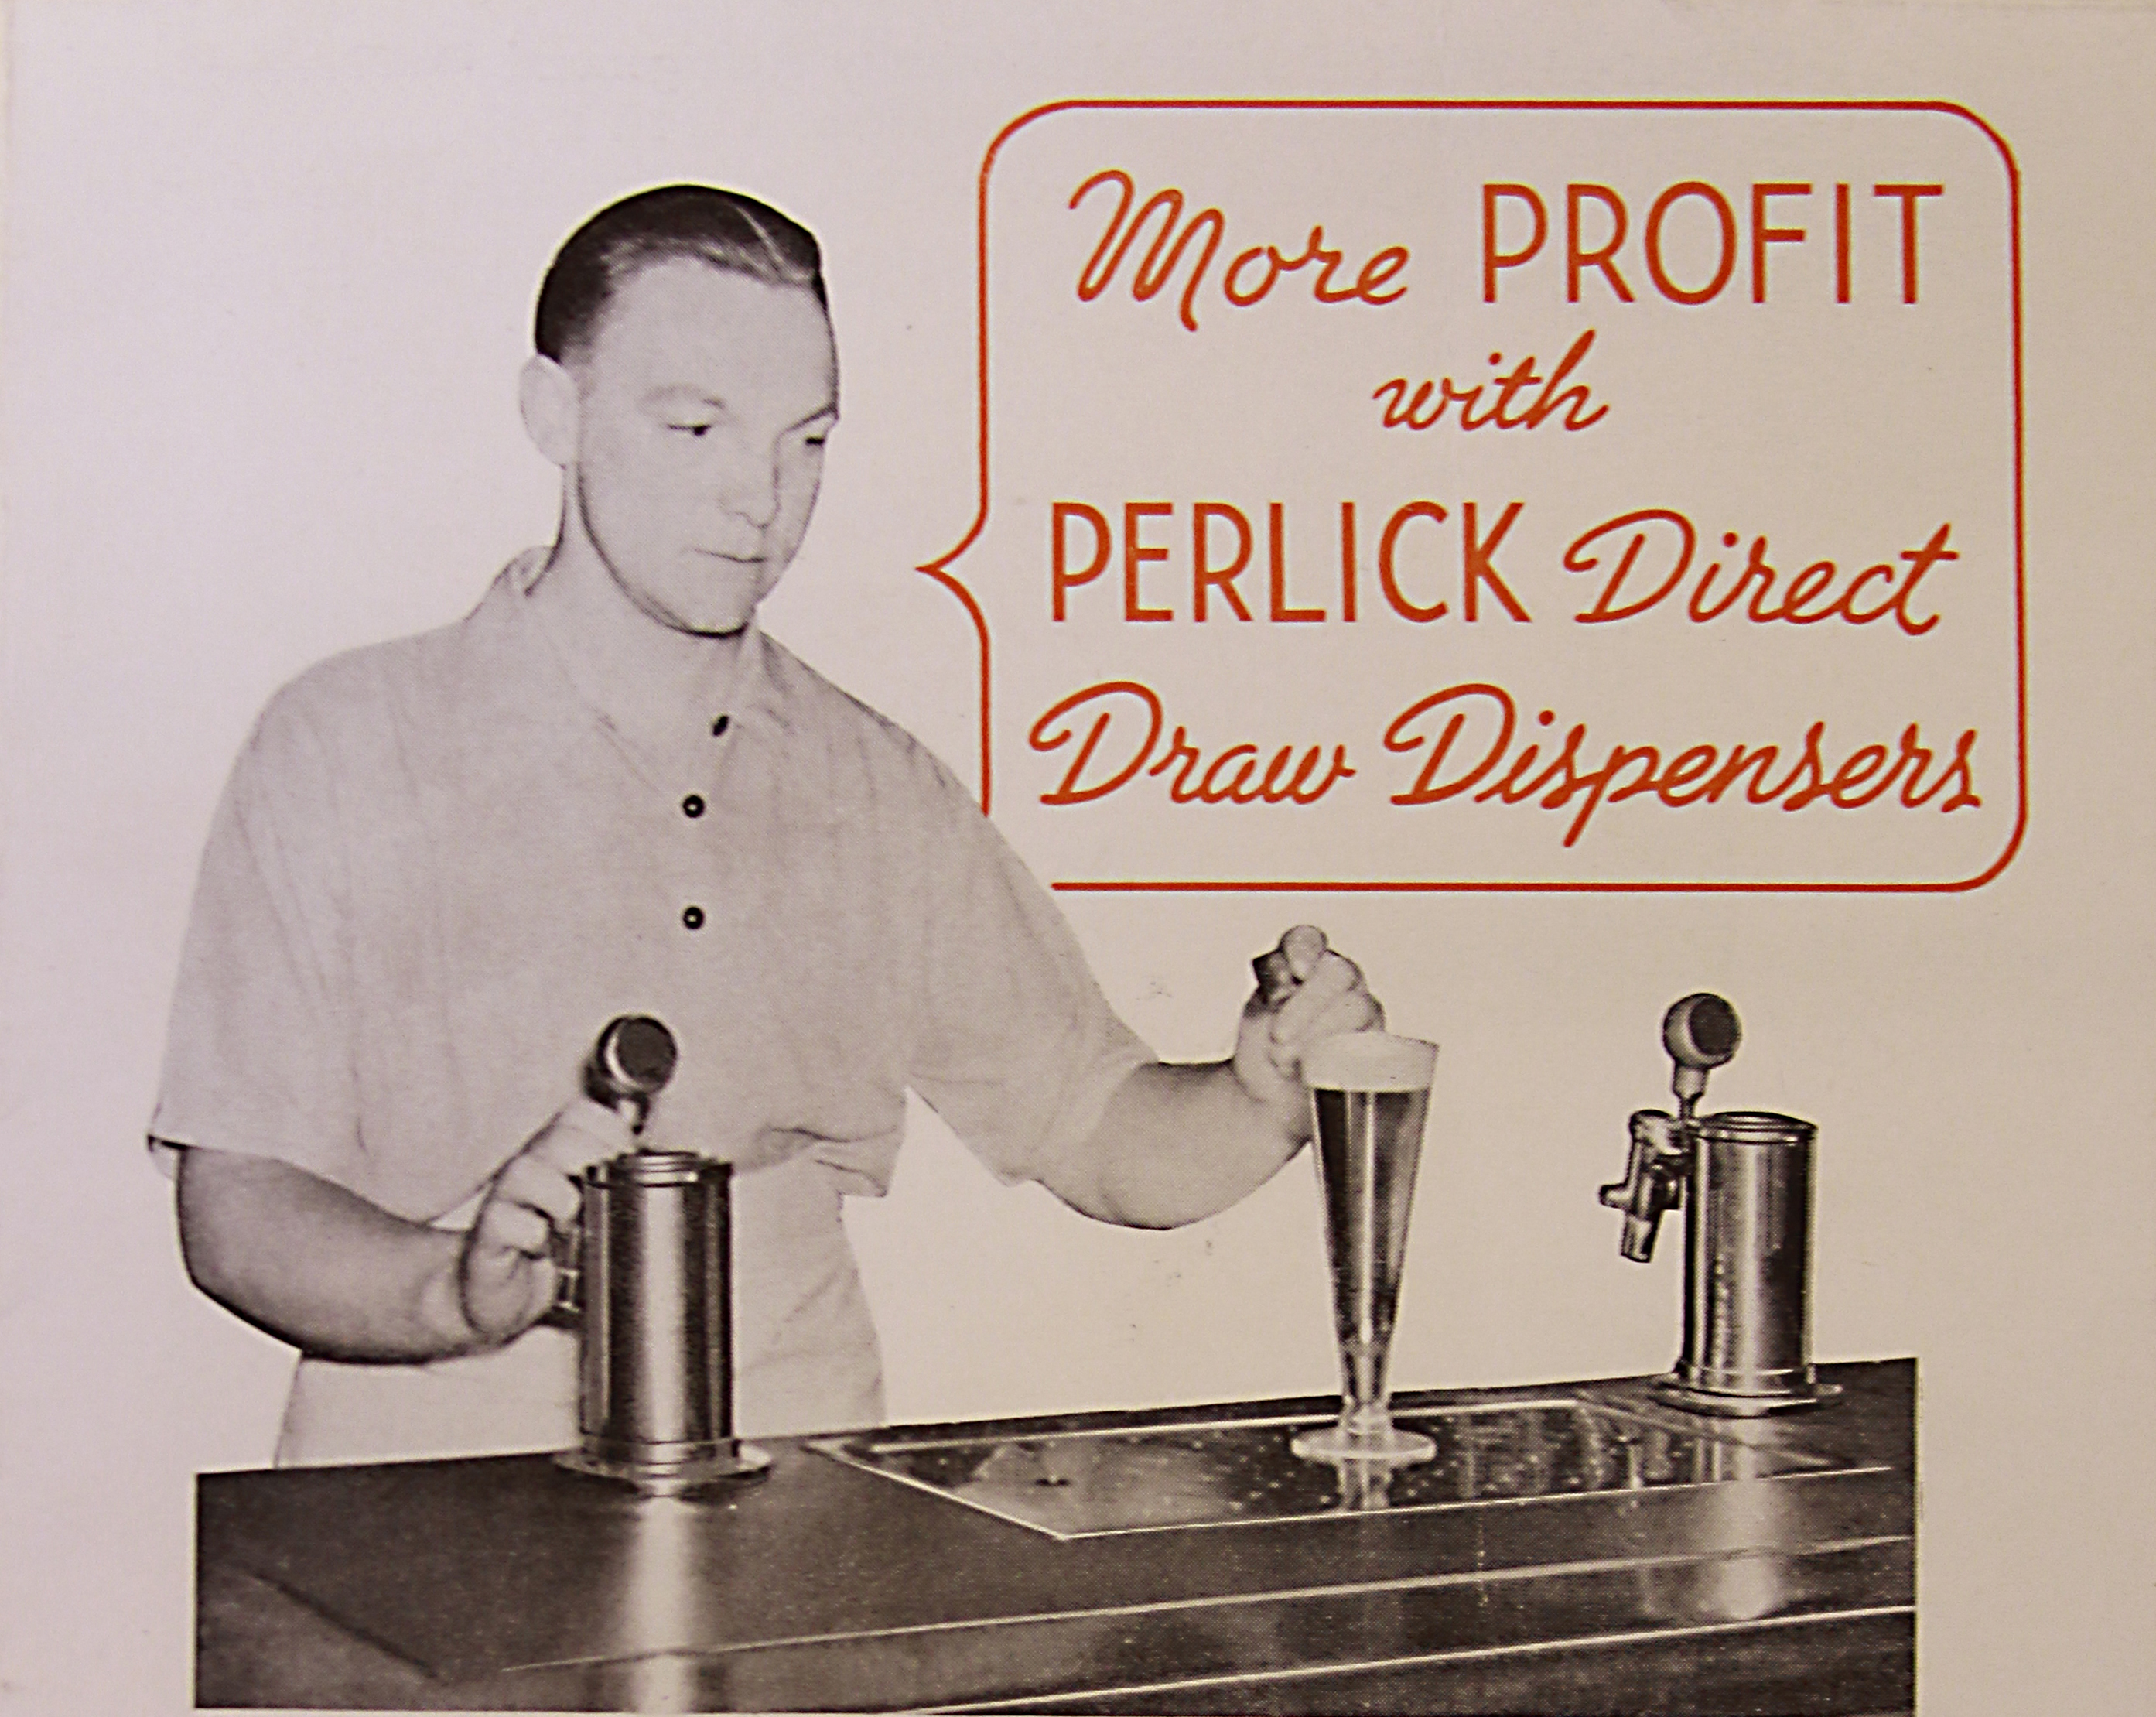 Perlick Direct Draw Dispensers